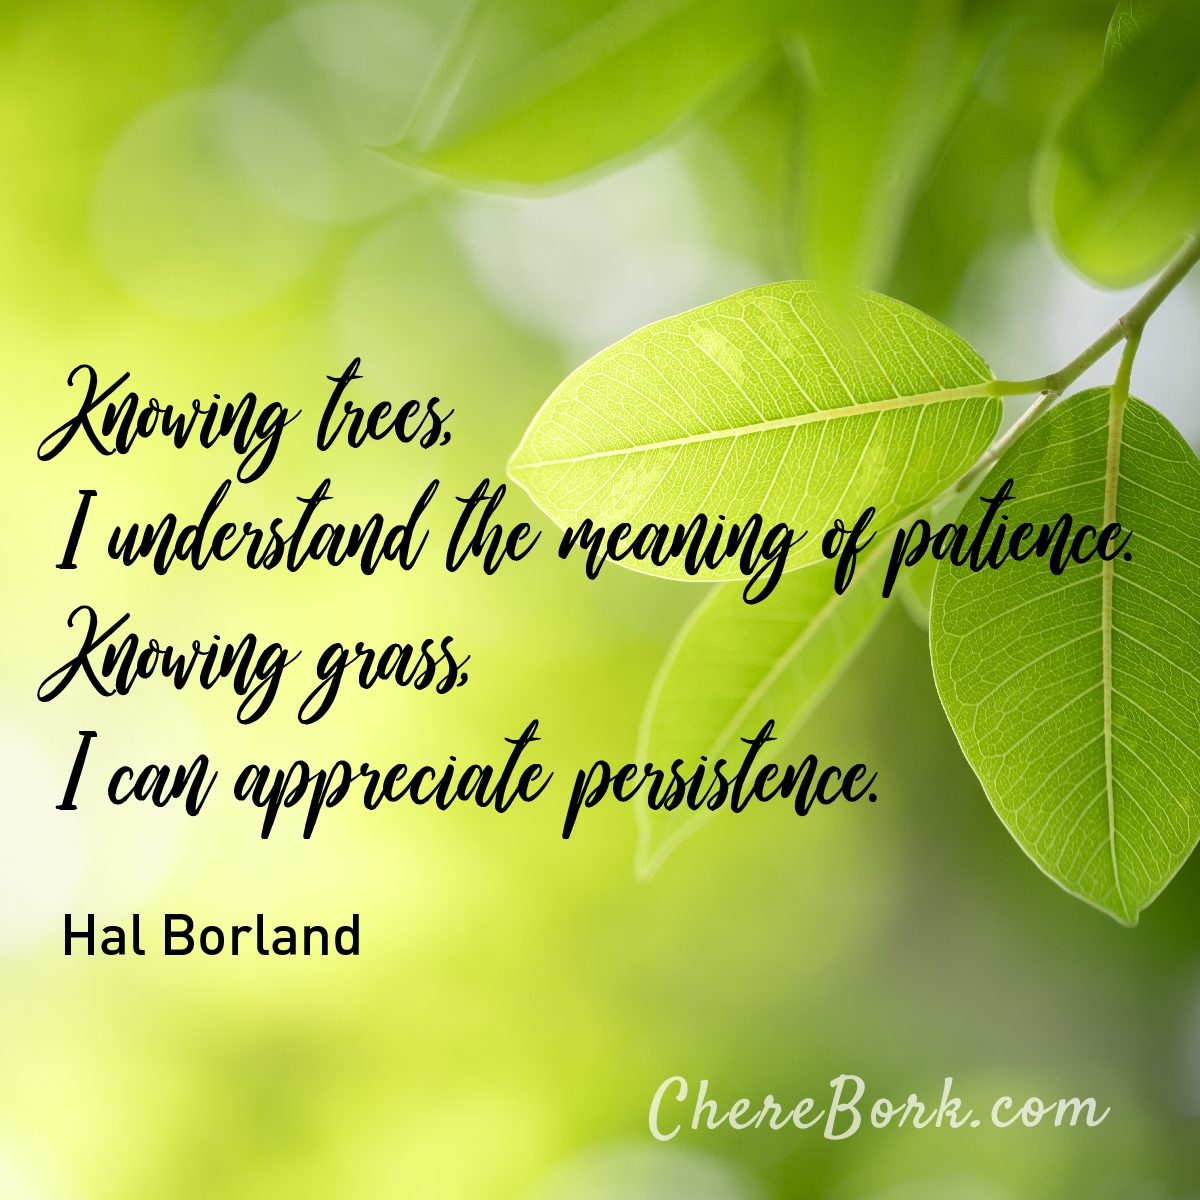 Knowing trees, I understand the meaning of patience. Knowing grass, I can appreciate persistence. -Hal Borland